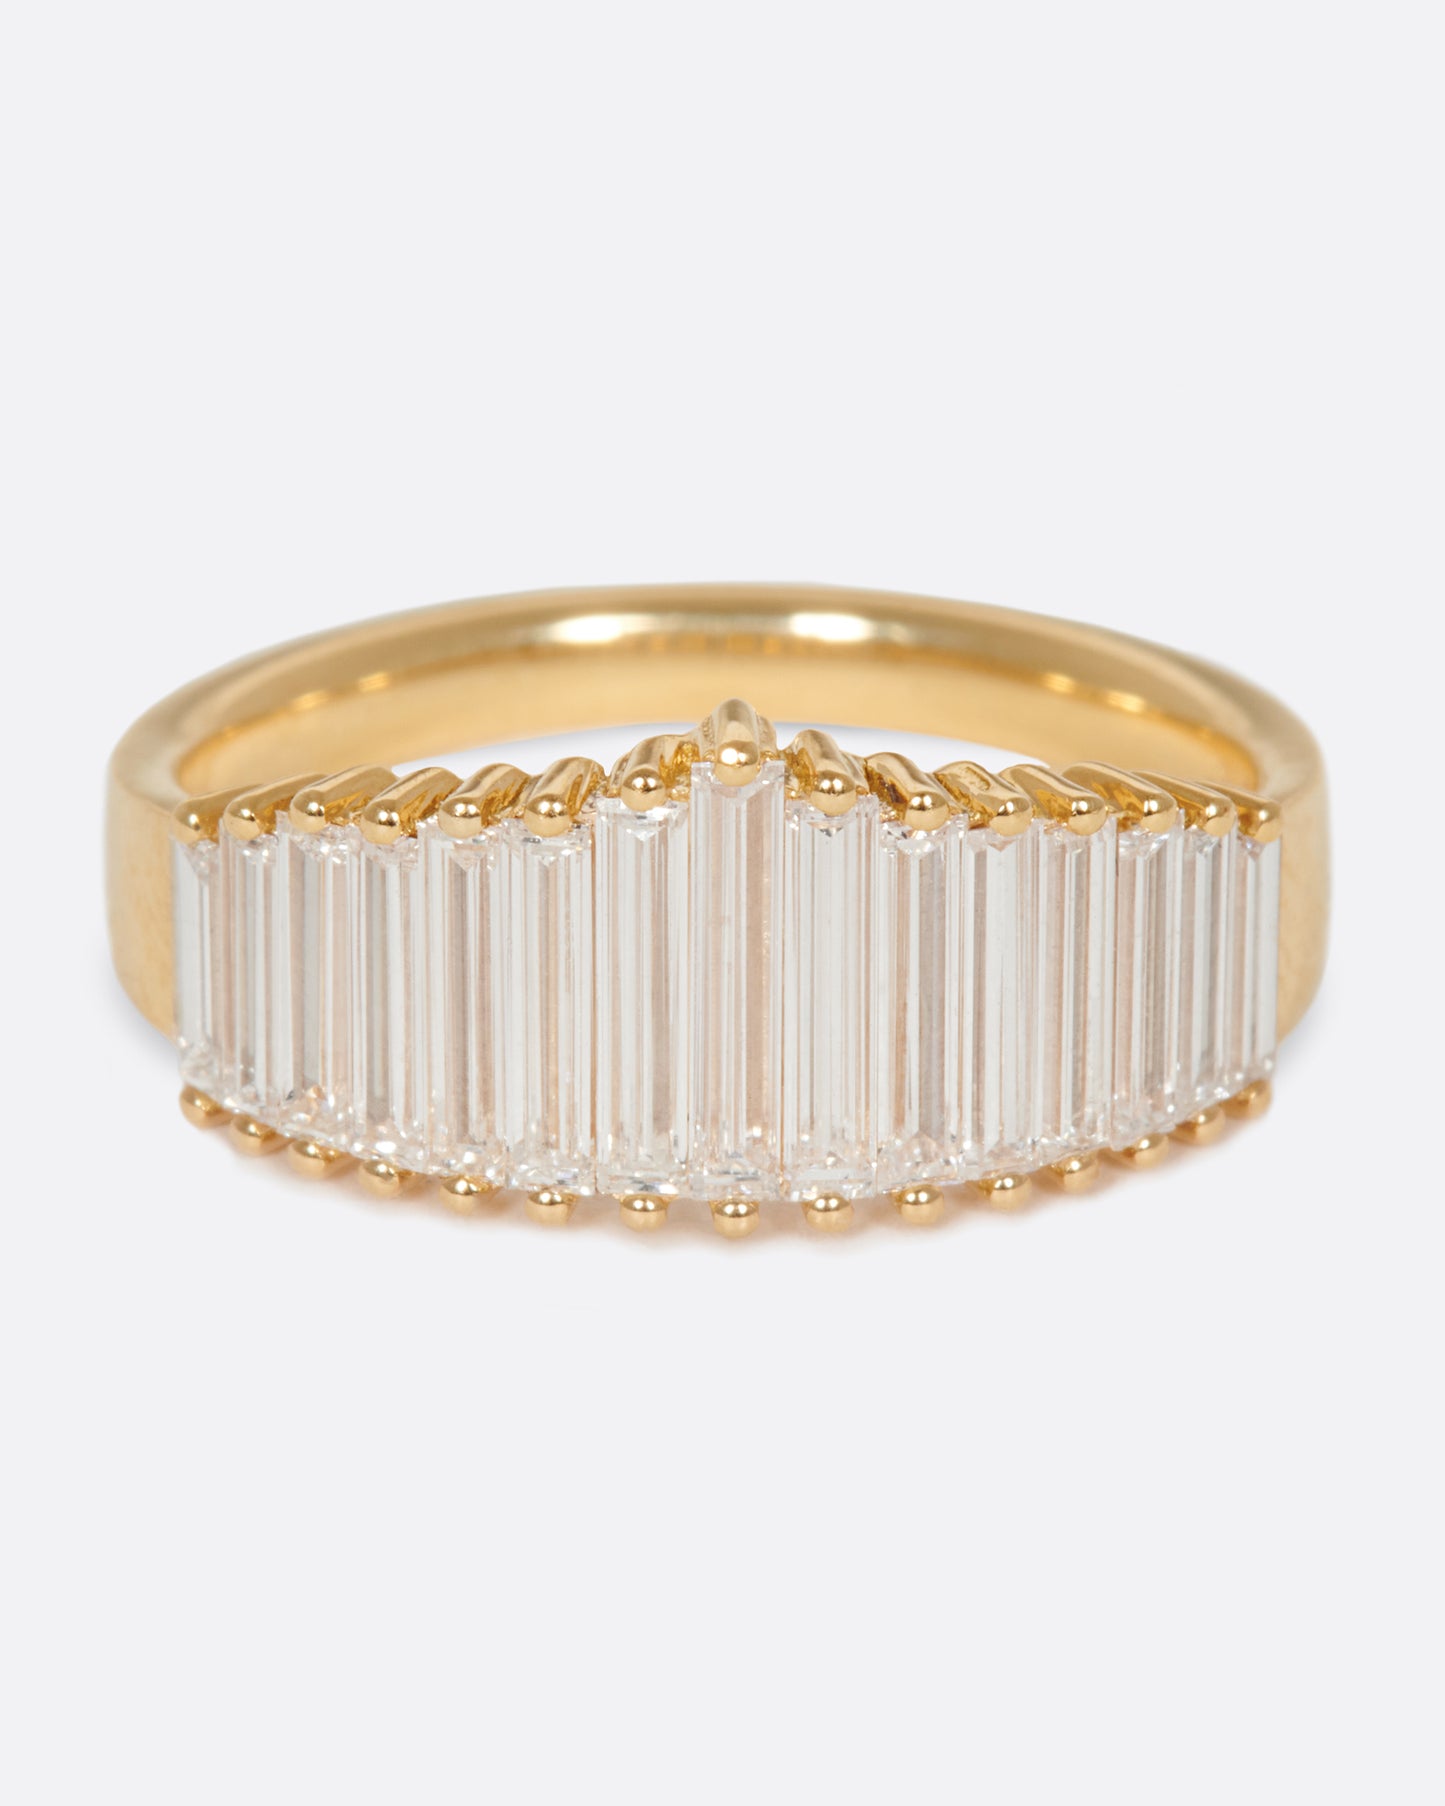 A wide crown ring of baguette diamonds, just as magnificent on its own as it is stacked.